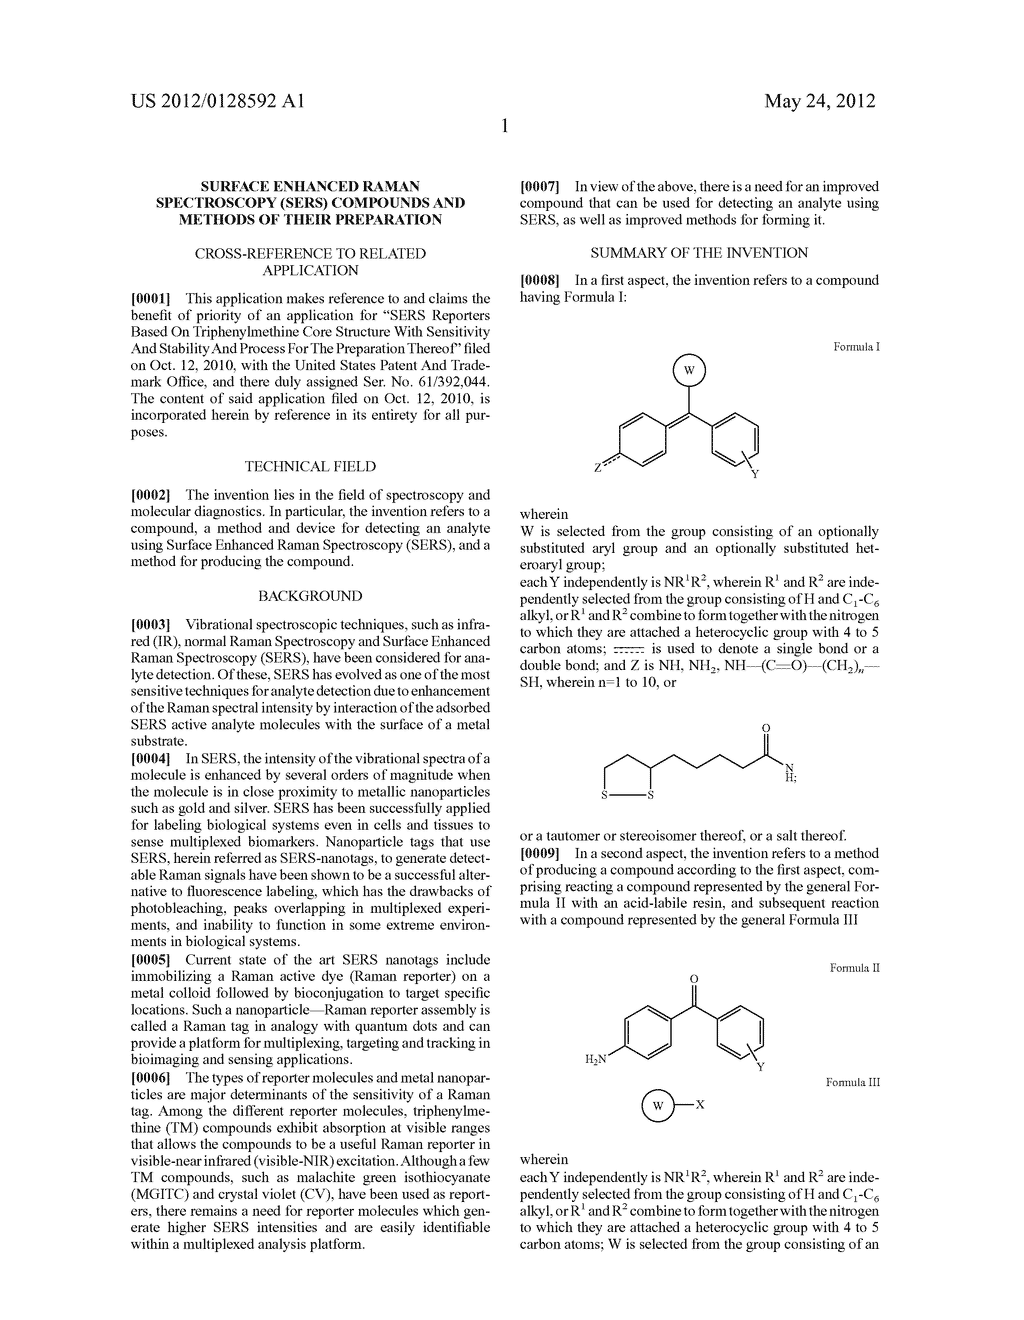 SURFACE ENHANCED RAMAN SPECTROSCOPY (SERS) COMPOUNDS AND METHODS OF THEIR     PREPARATION - diagram, schematic, and image 48